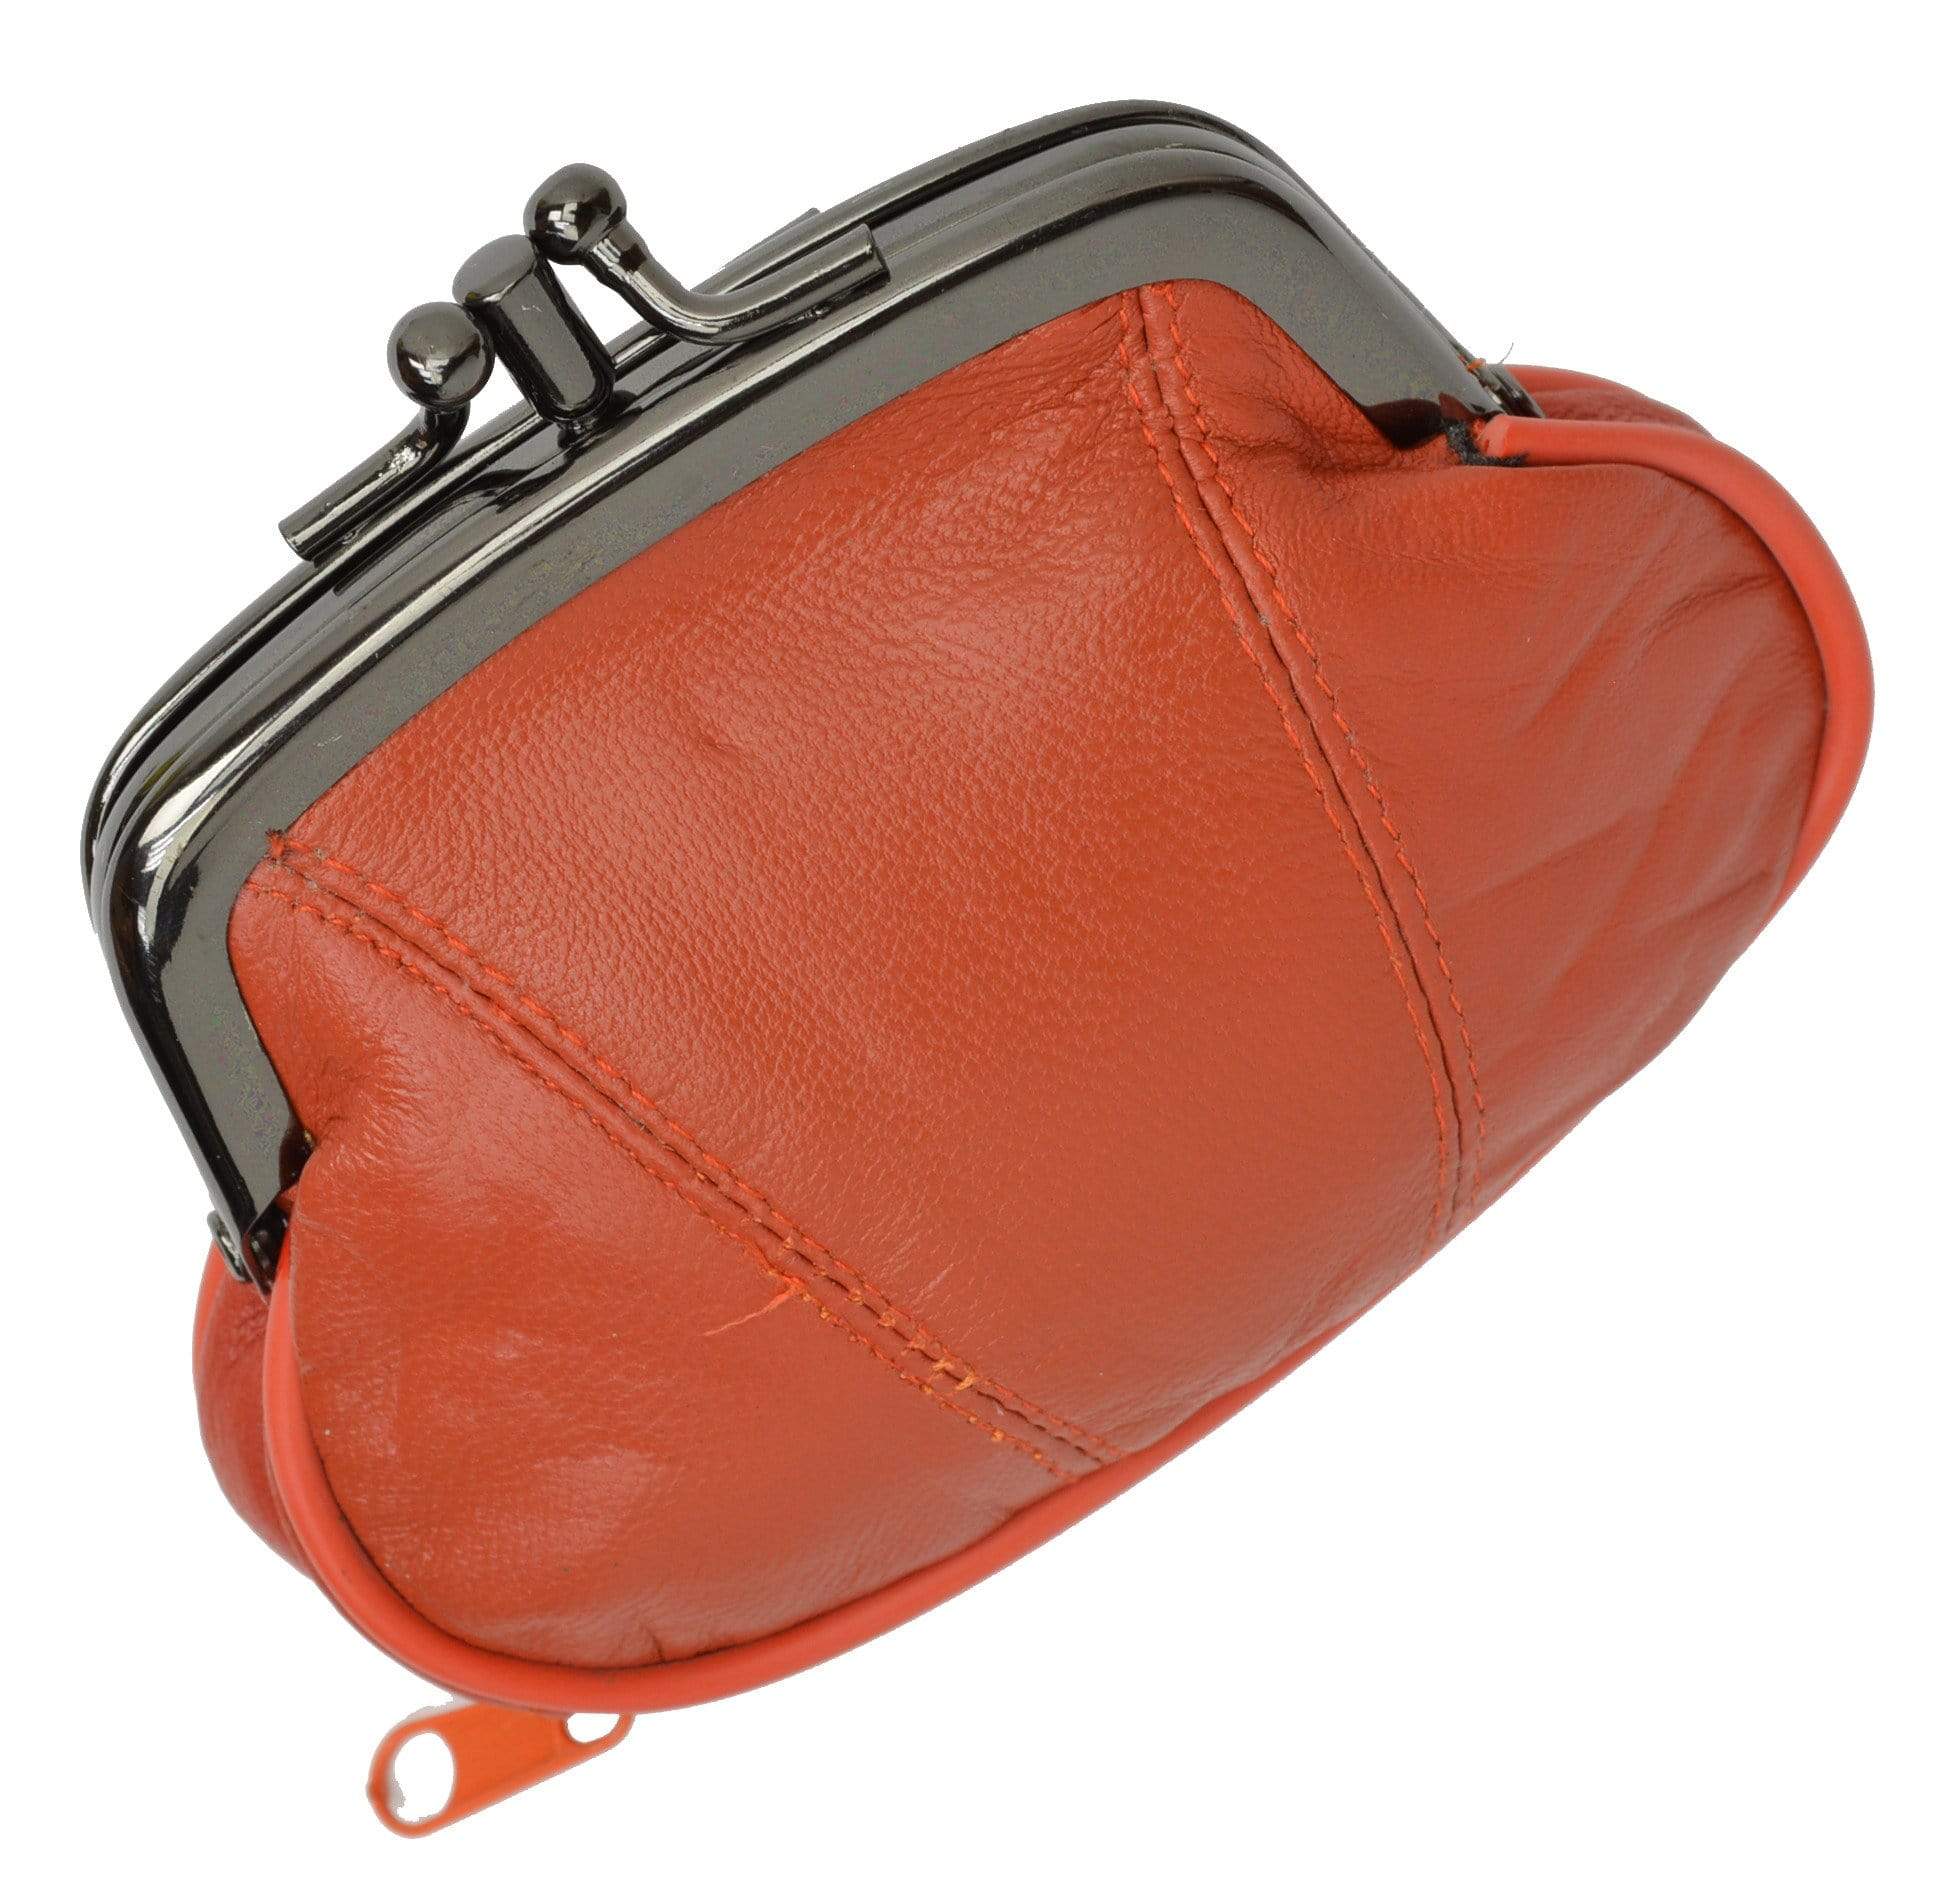 Marshal Genuine Leather Change Purse with Clasp Closure 11-3016 Red